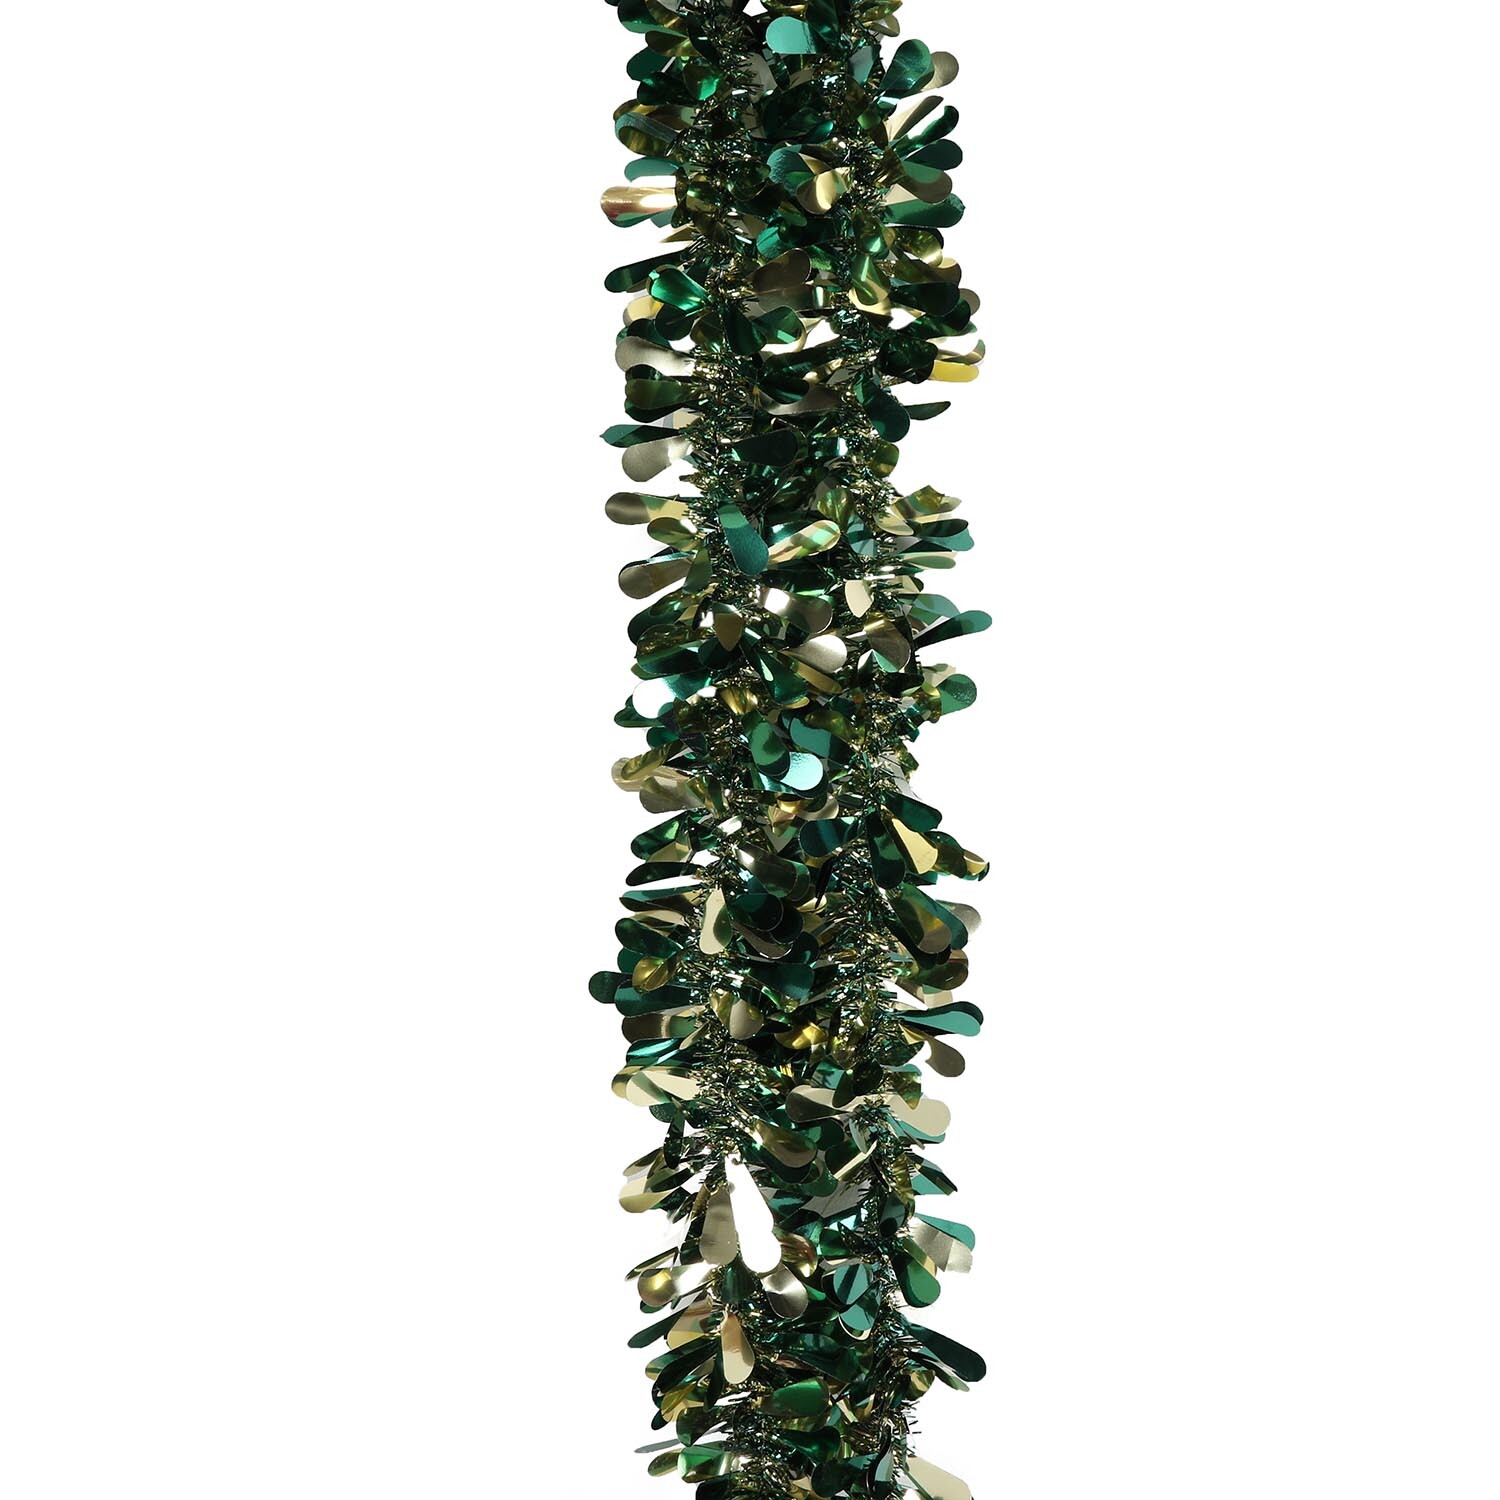 Emerald and Gold Tinsel - Emerald Image 1